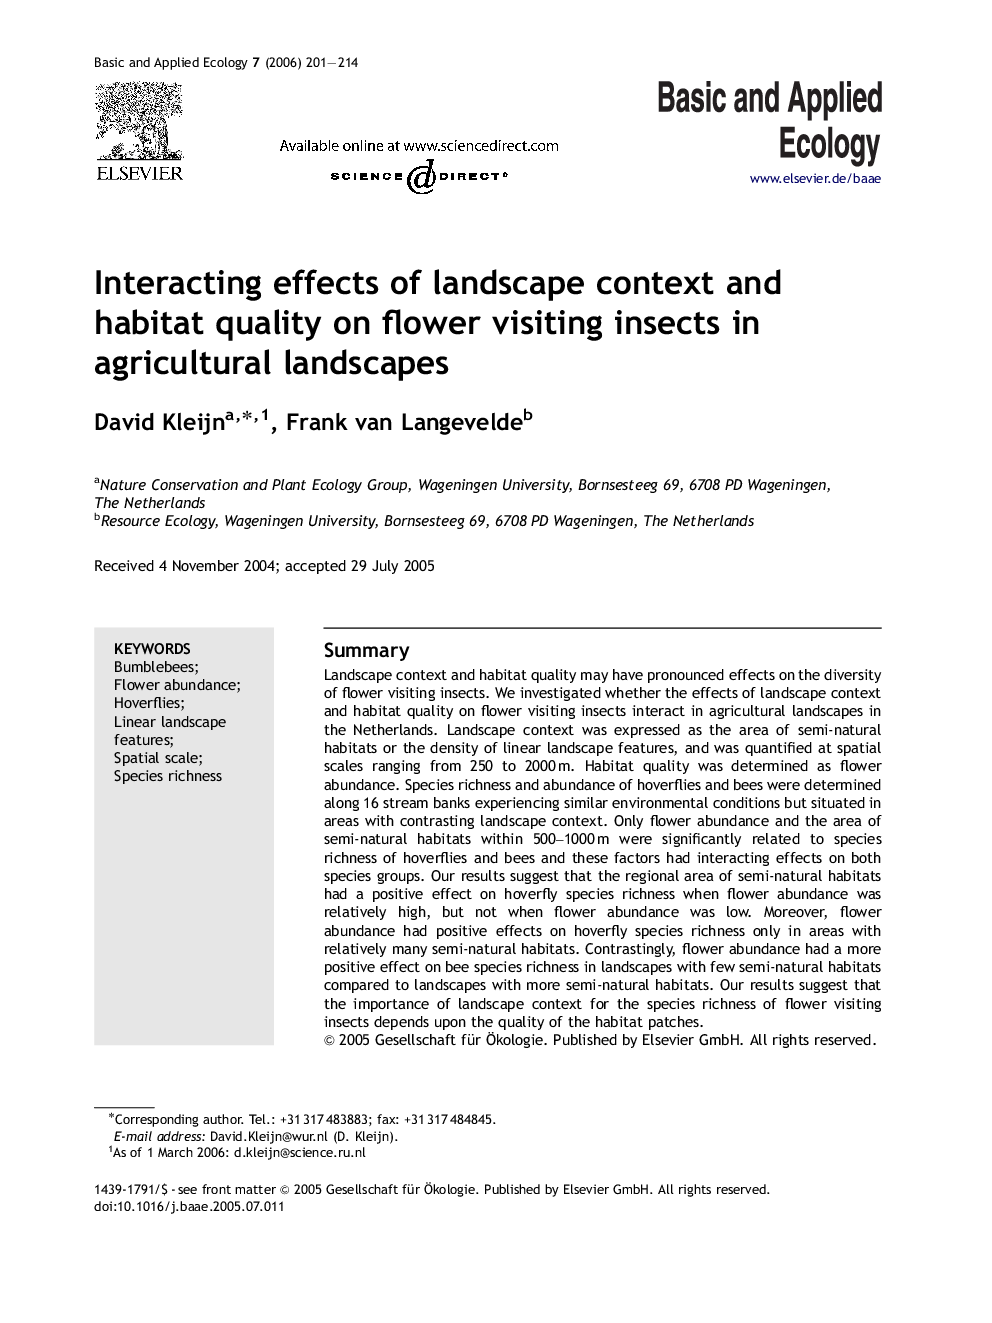 Interacting effects of landscape context and habitat quality on flower visiting insects in agricultural landscapes